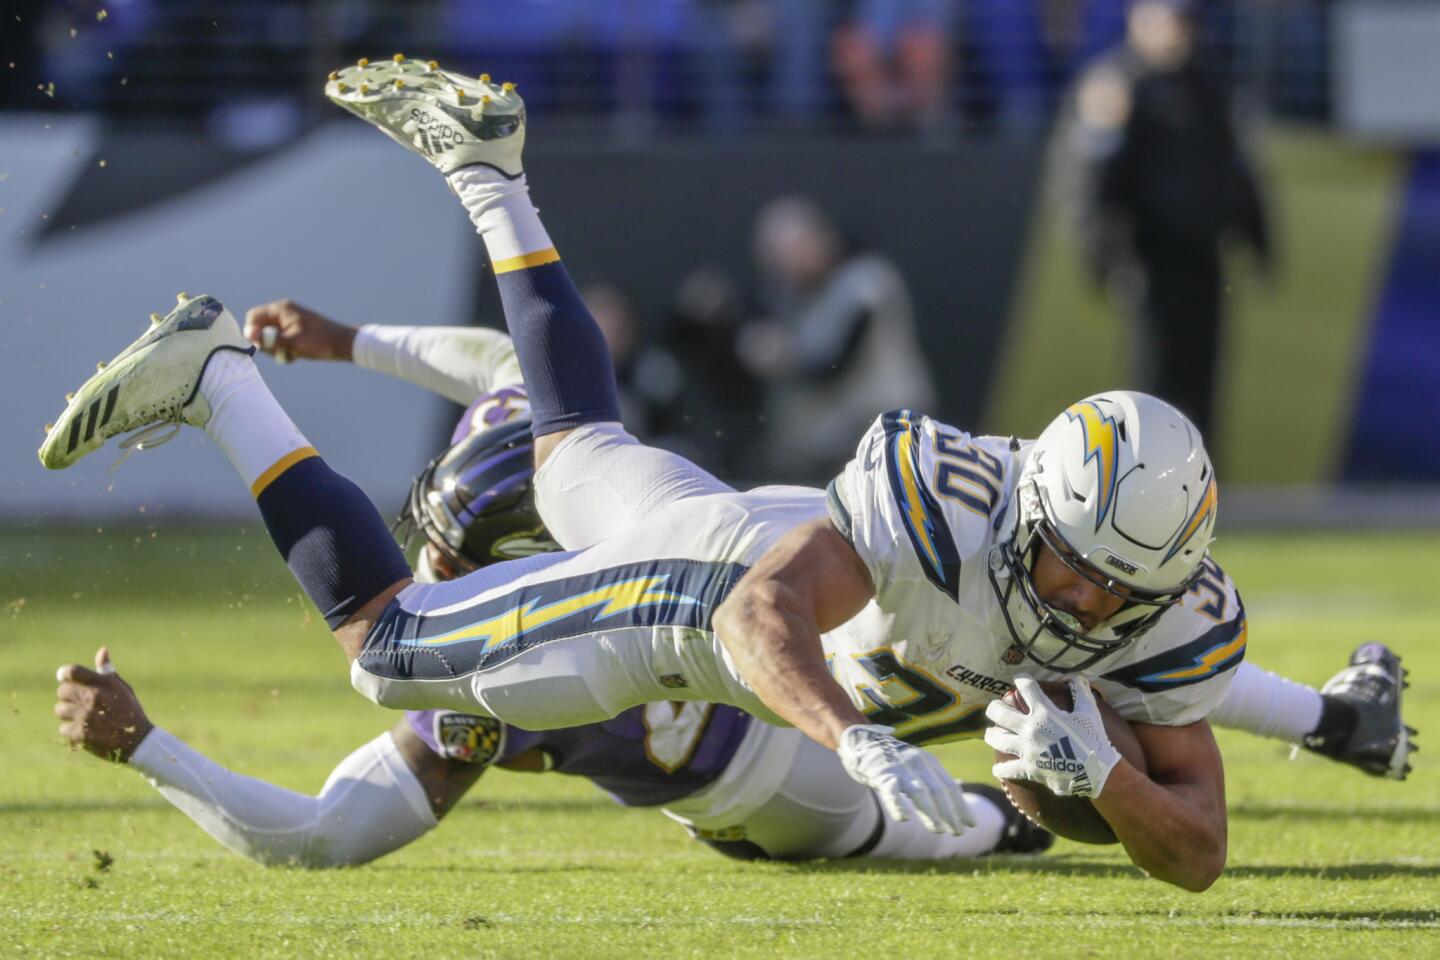 Chargers running back Austin Ekeler is tripped up for a three-yard reception during a second-quarter drive.